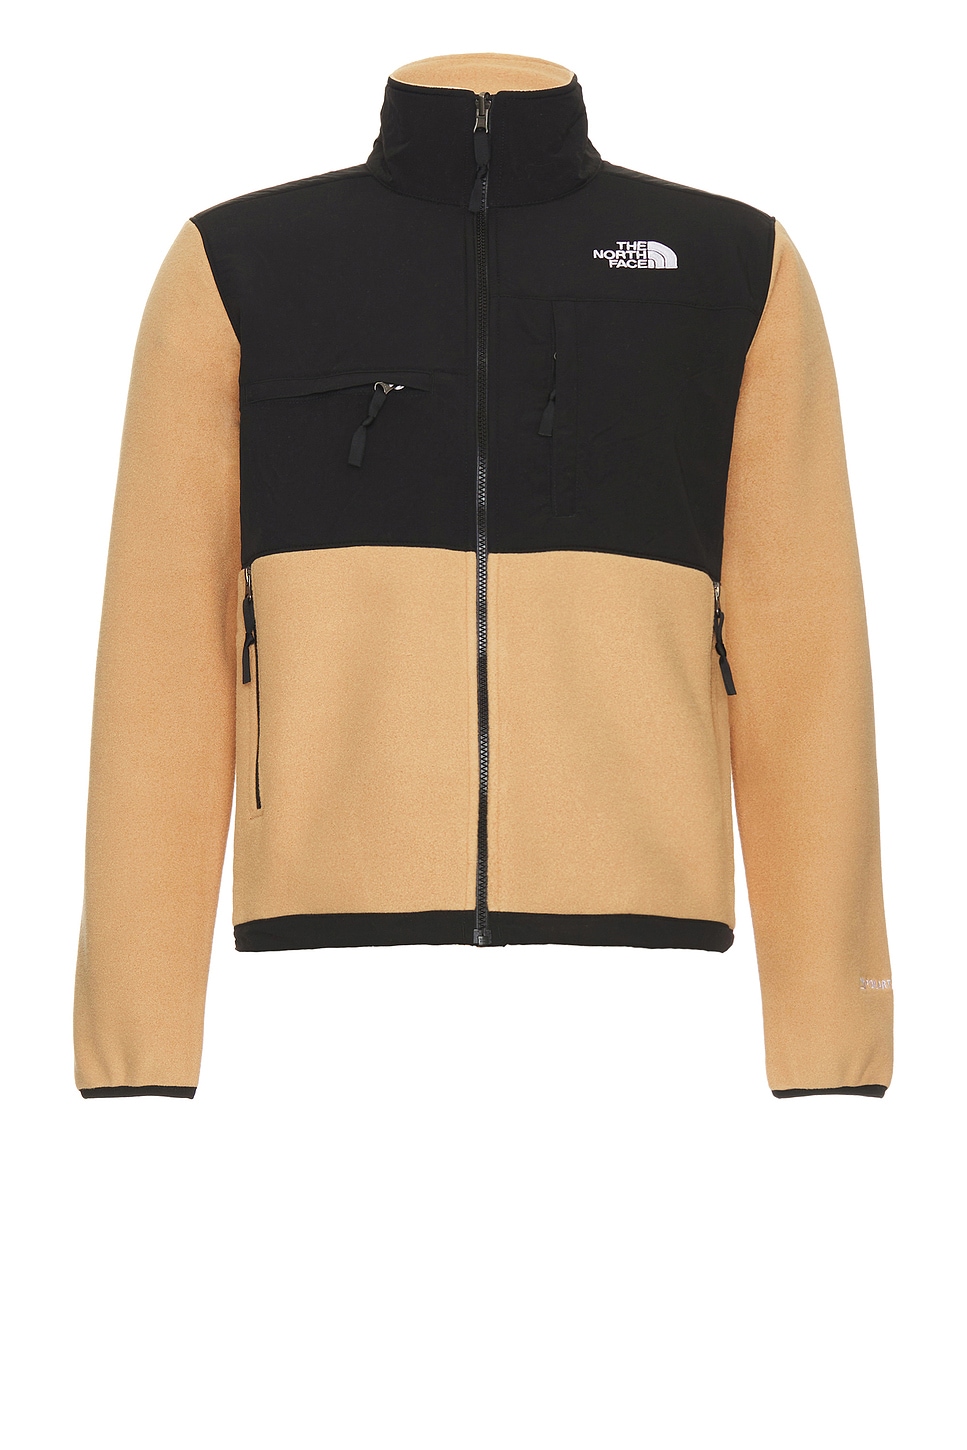 The North Face Denali Jacket in Almond Butter & Tnf Black | FWRD